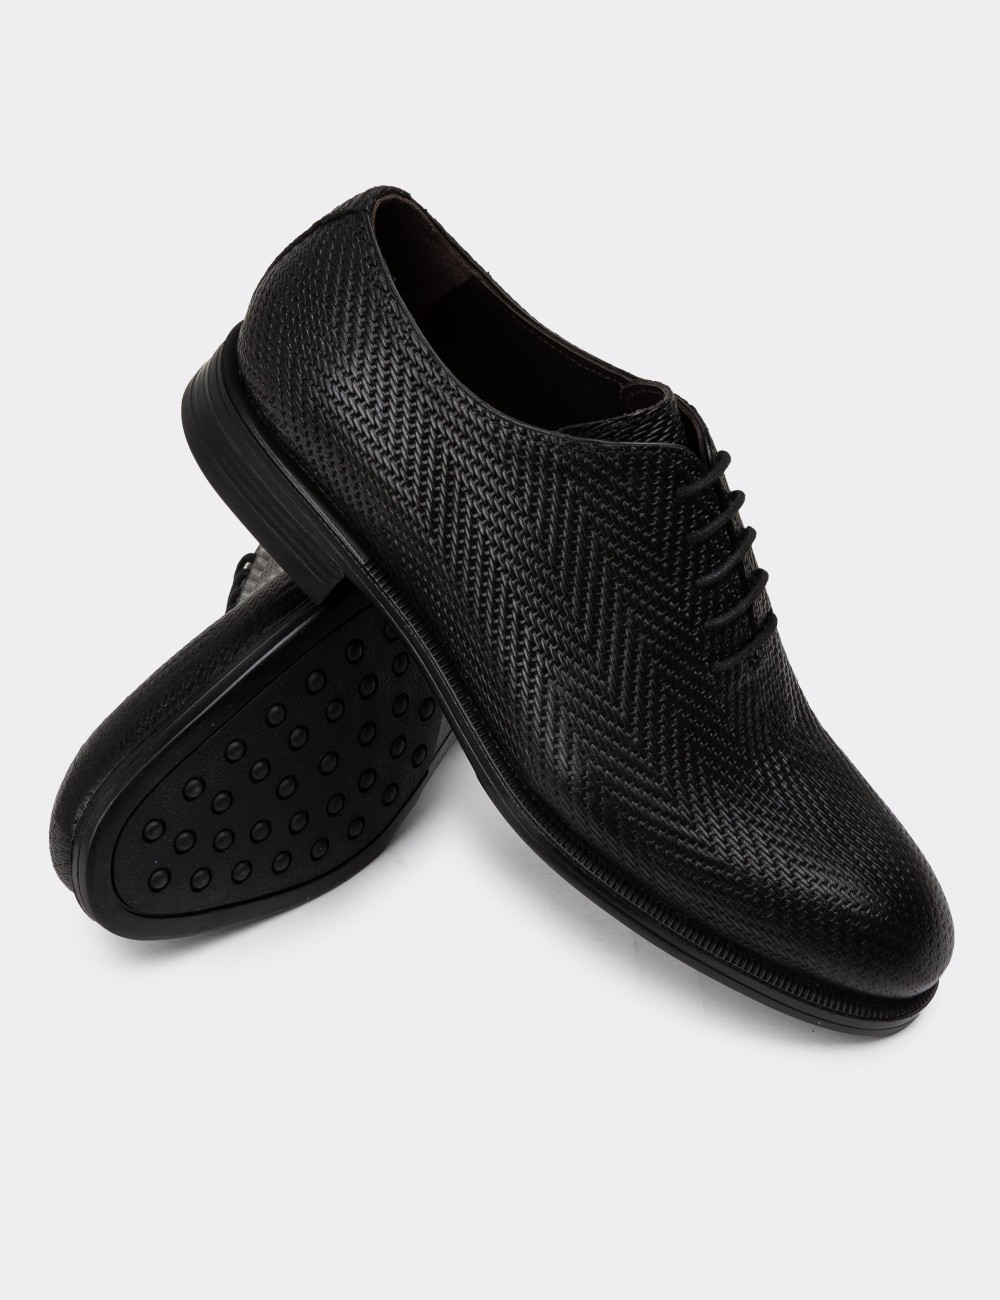 Black Leather Classic Shoes - 01830MSYHC04